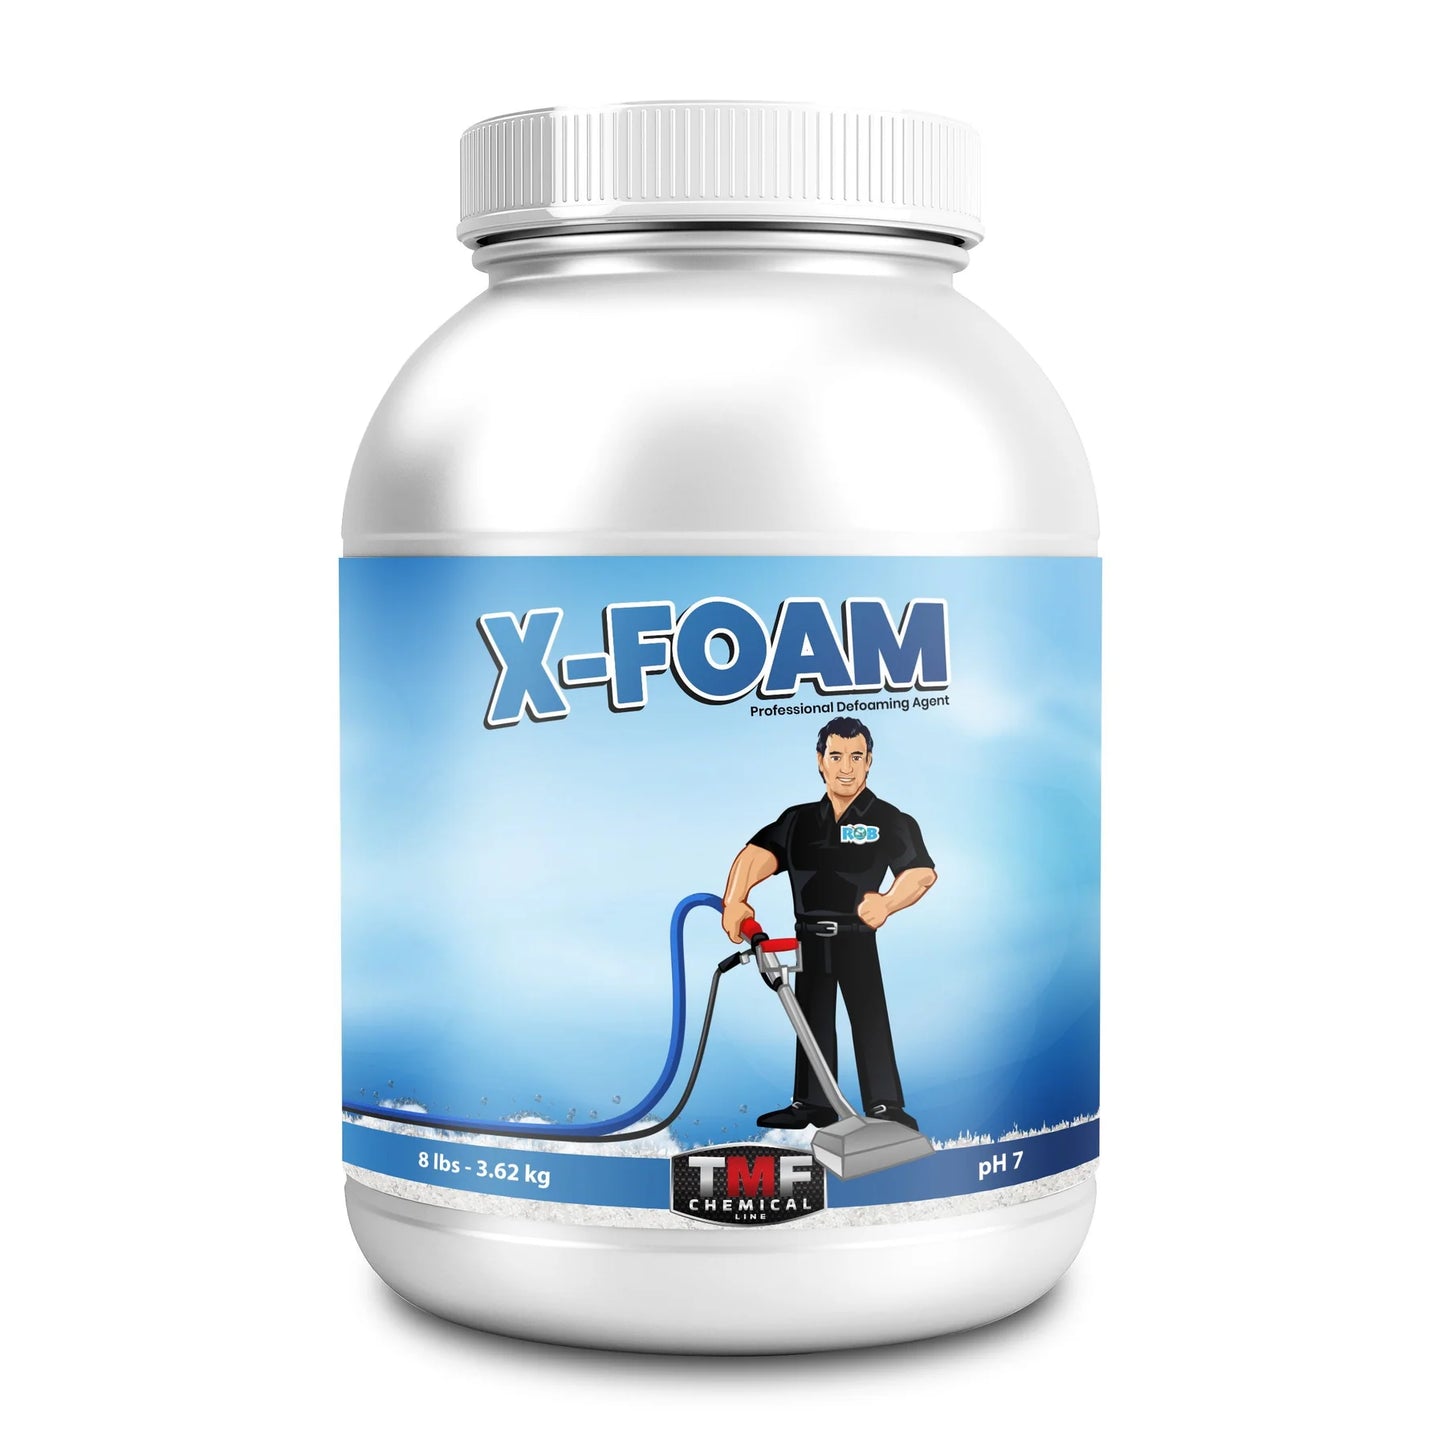 X-FOAM - Concentrated Powdered Defoamer